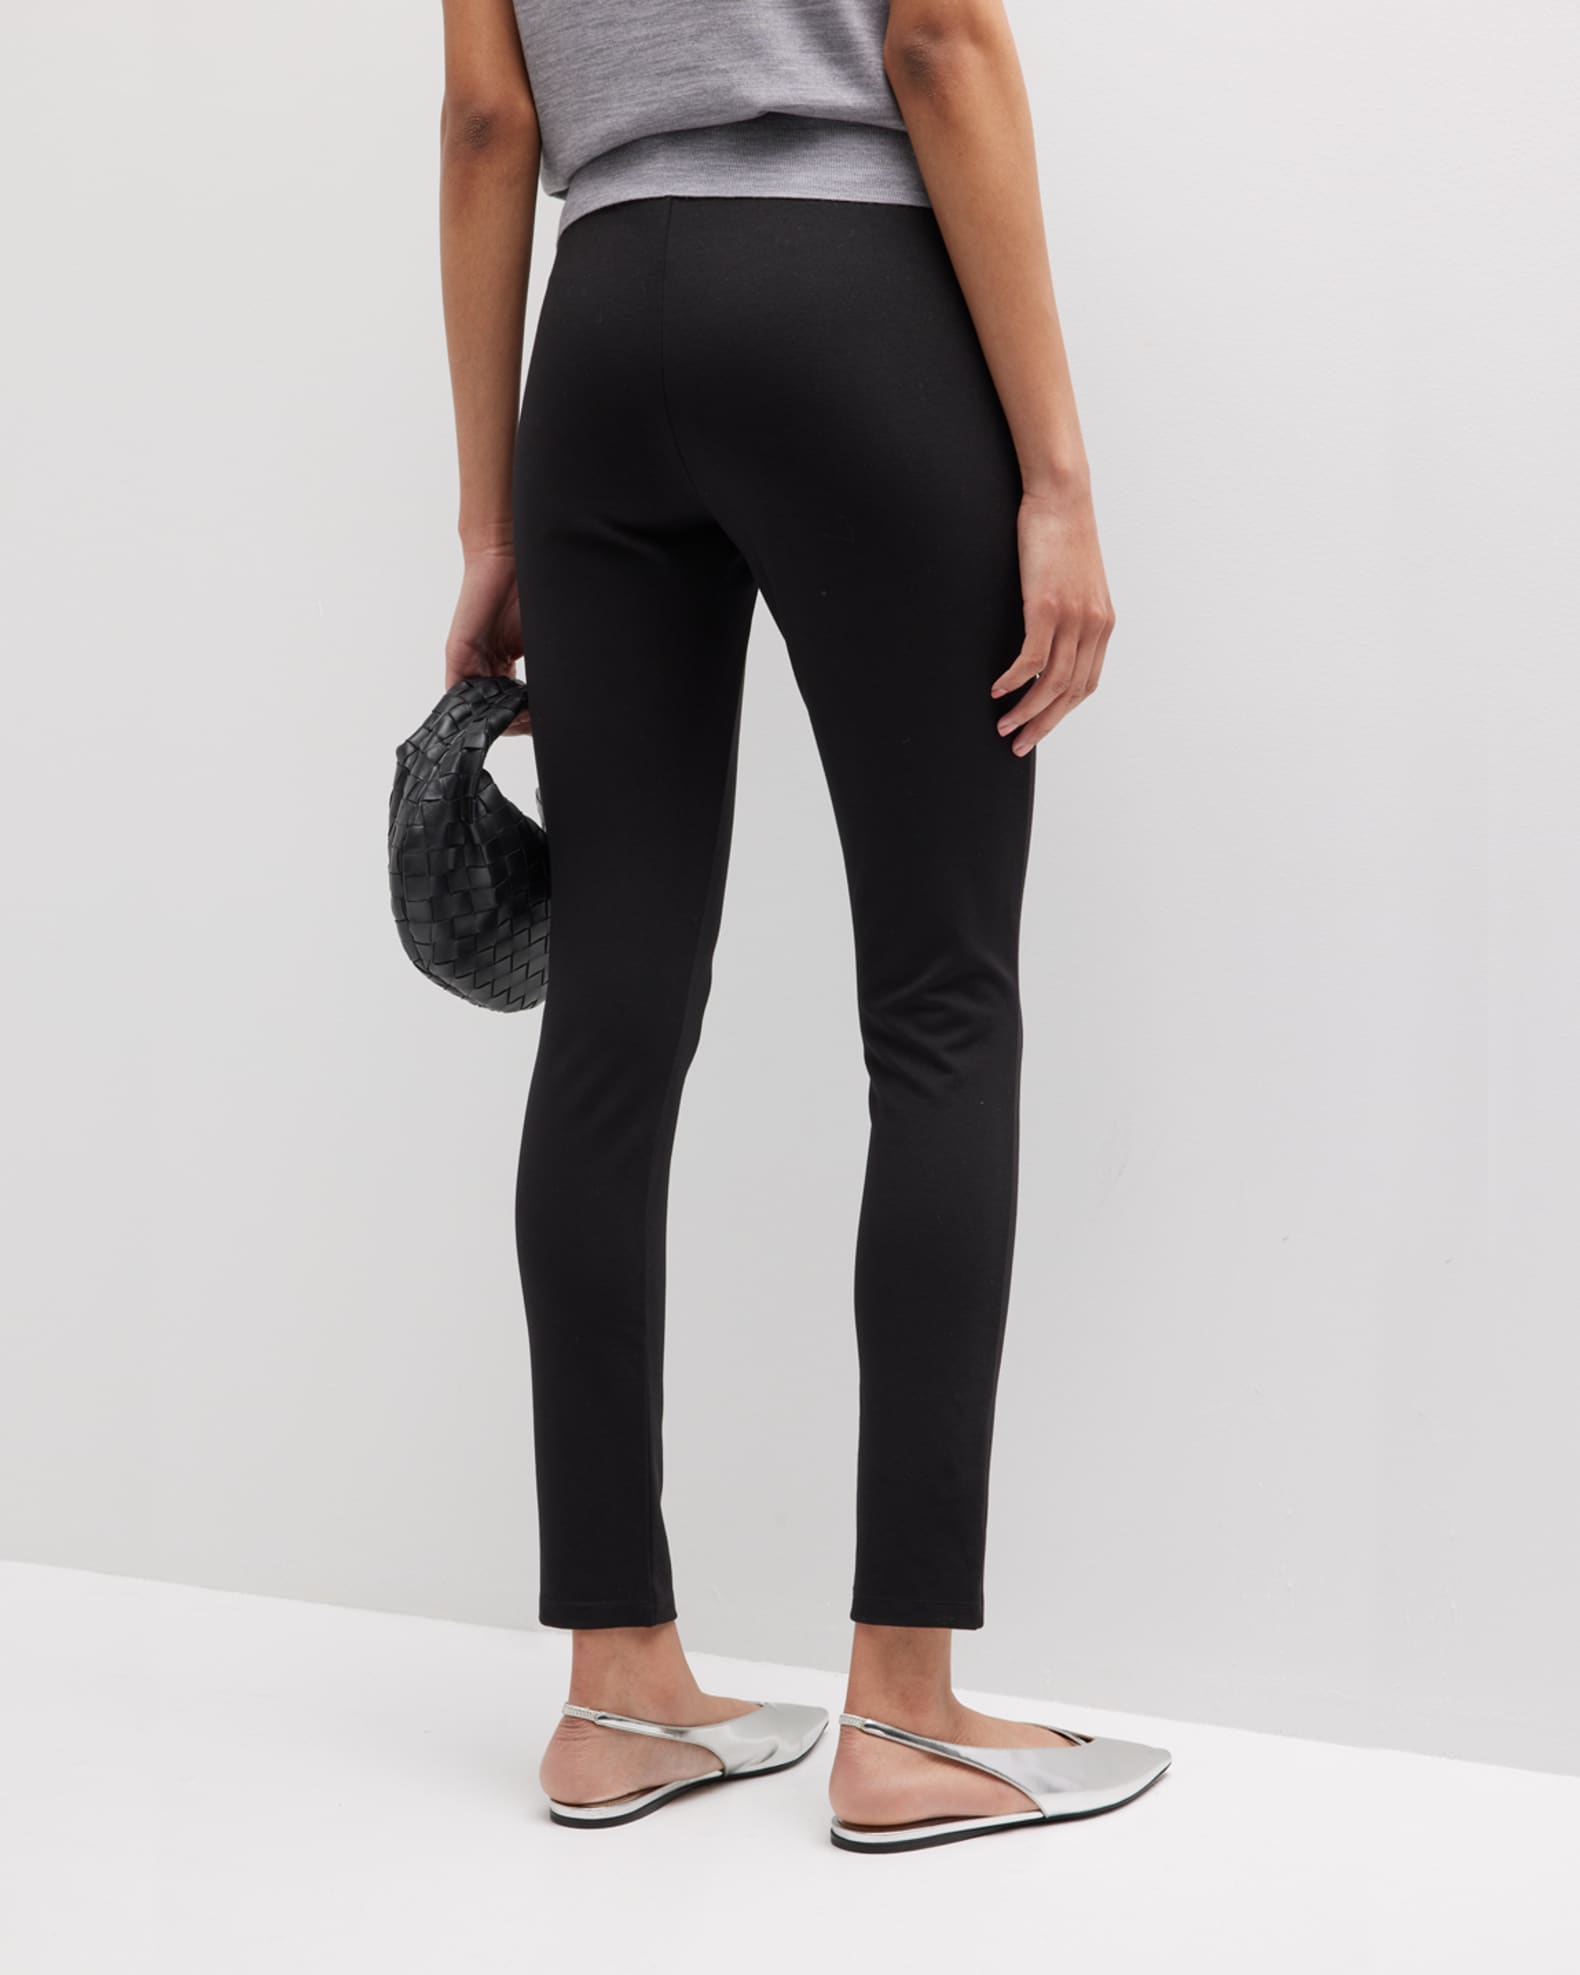 Theory Shawn Pull-On Stretch Leggings | Neiman Marcus